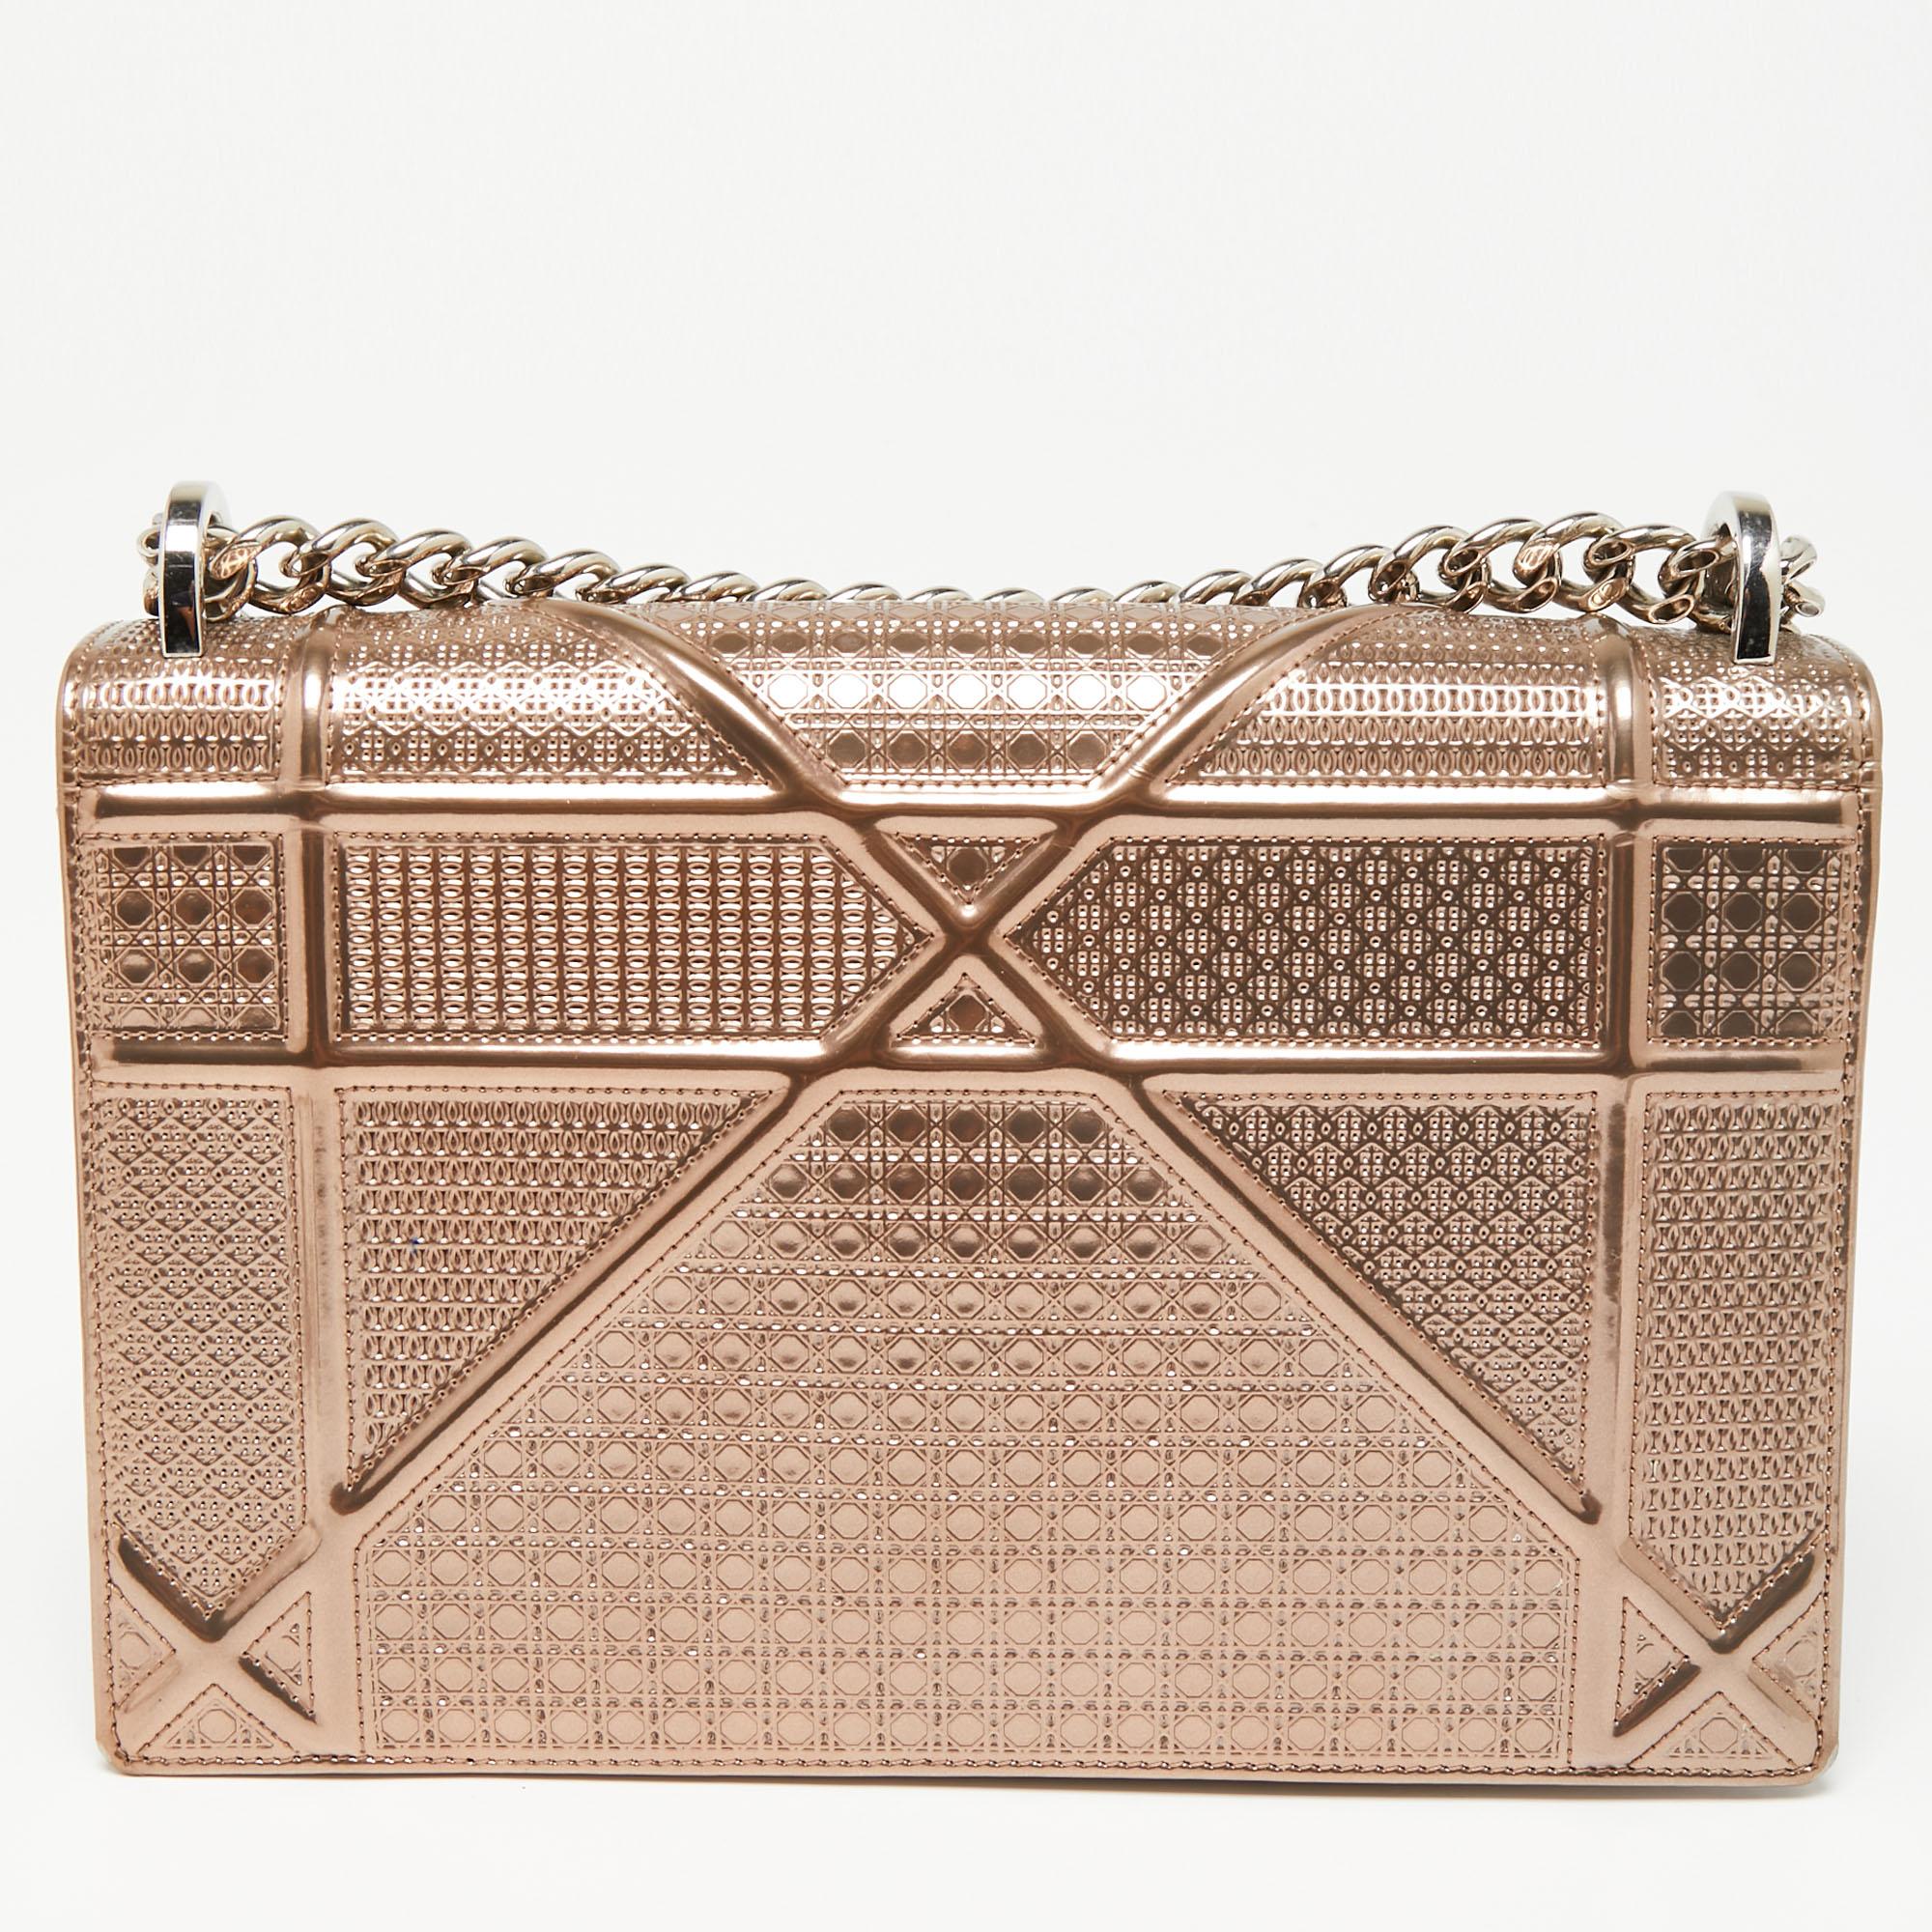 Crafted from patent leather with a Cannage pattern, this Dior Diorama bag embodies skillful craftsmanship and an architectural shape. The leather-lined interior has enough room to neatly hold your evening valuables and the bag features silver-tone